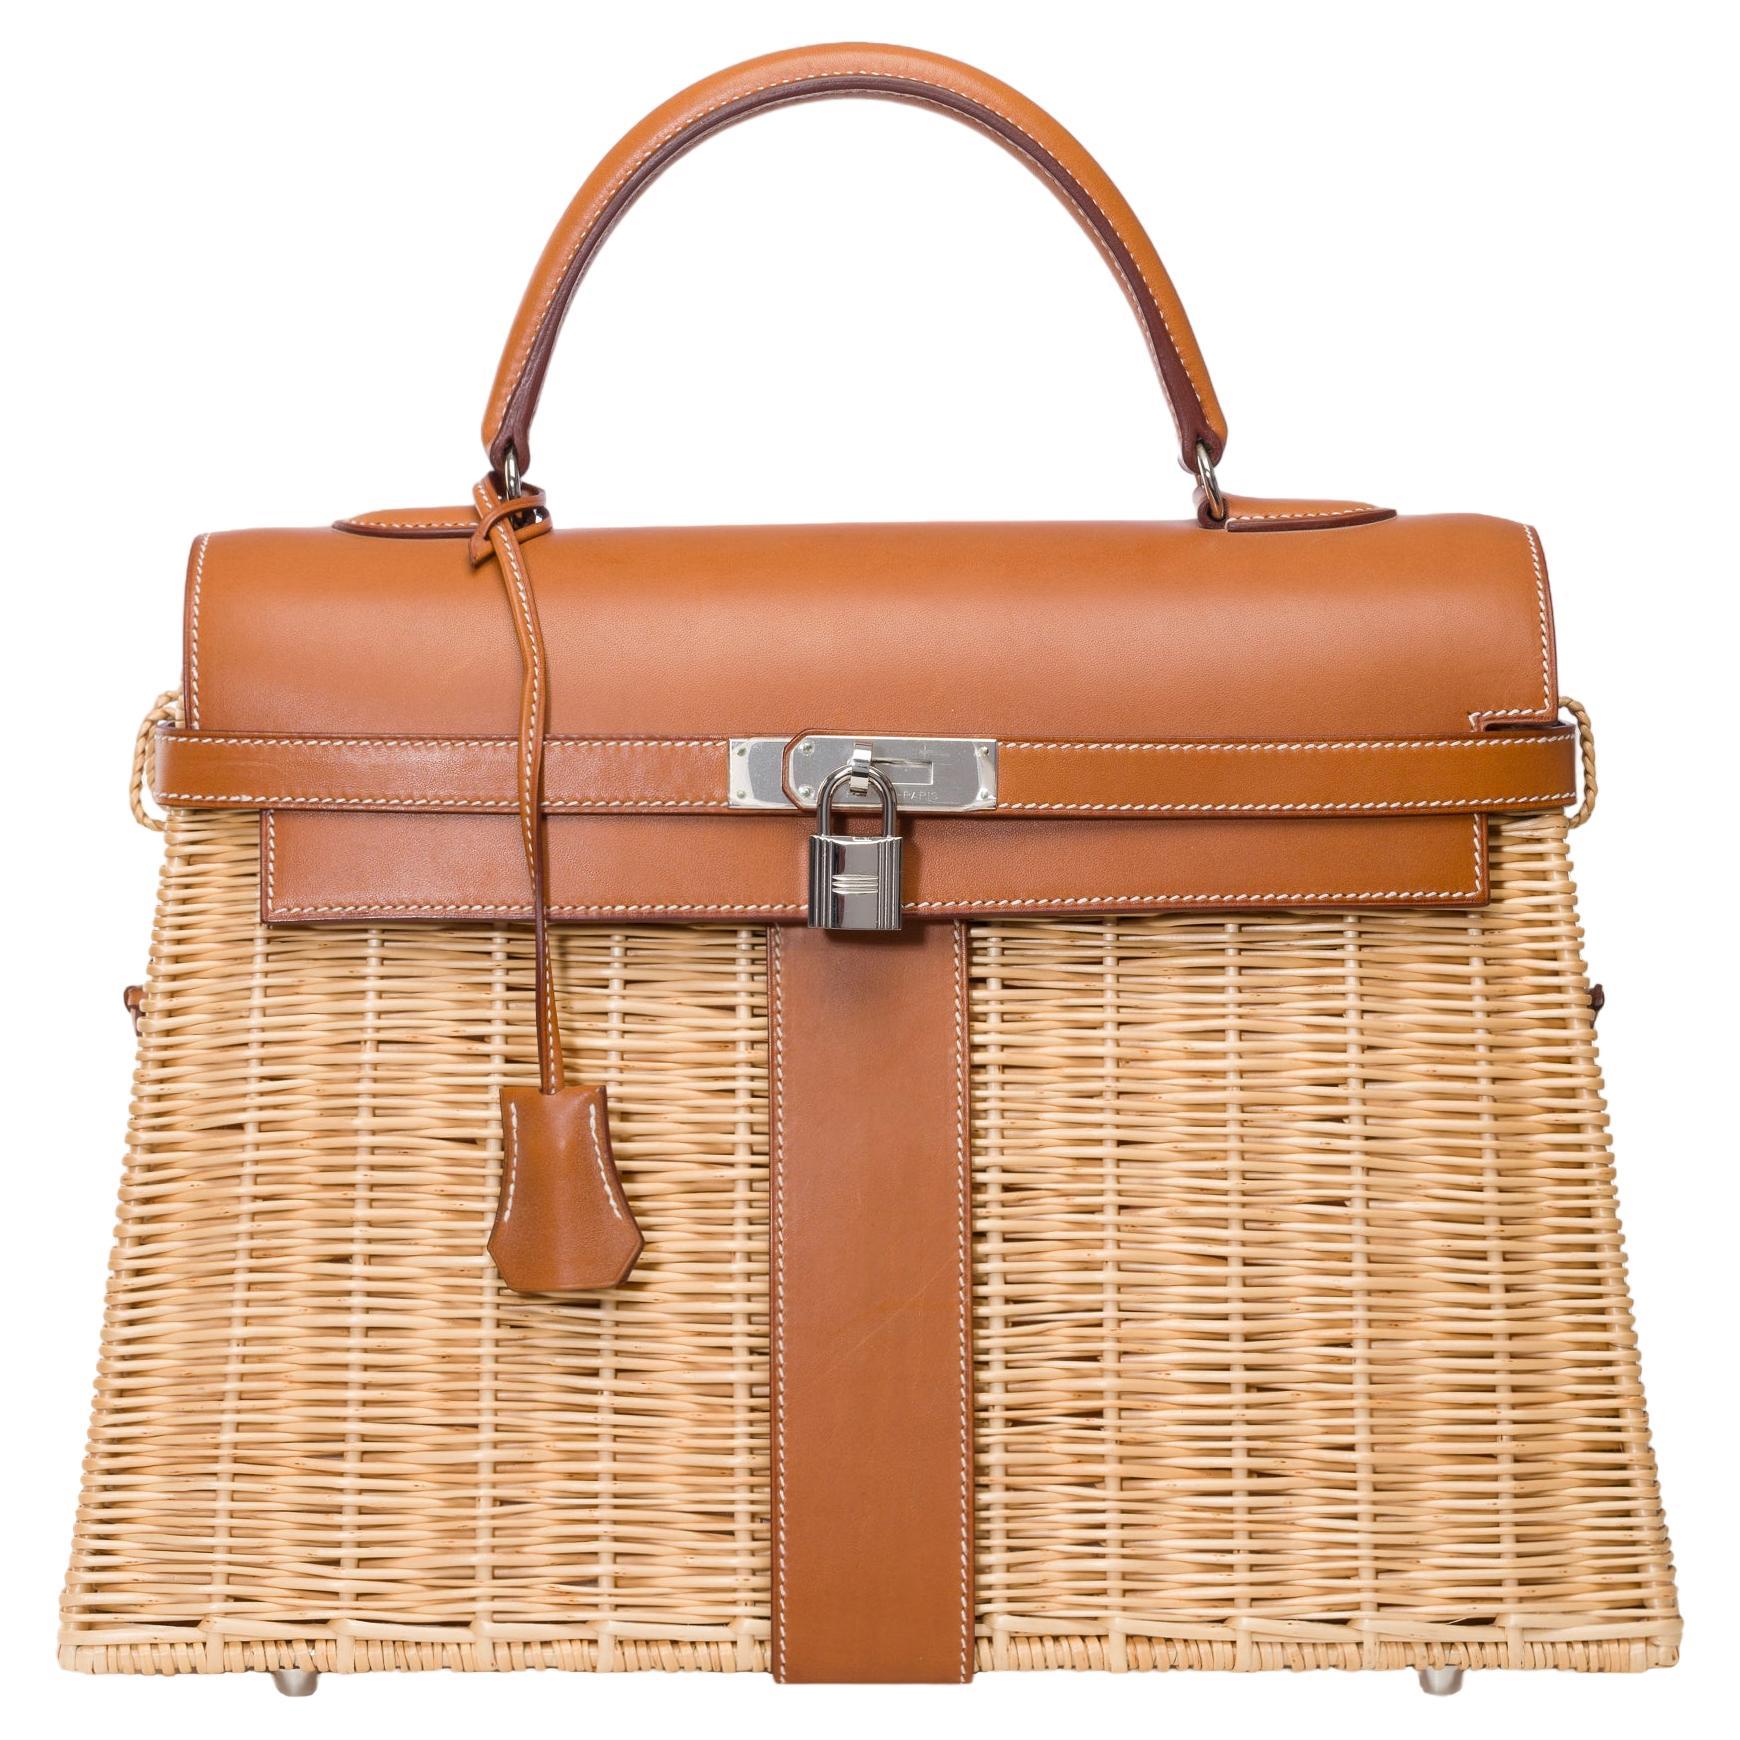 Rare Hermes Kelly 35 Picnic in wicker and barenia leather , SHW